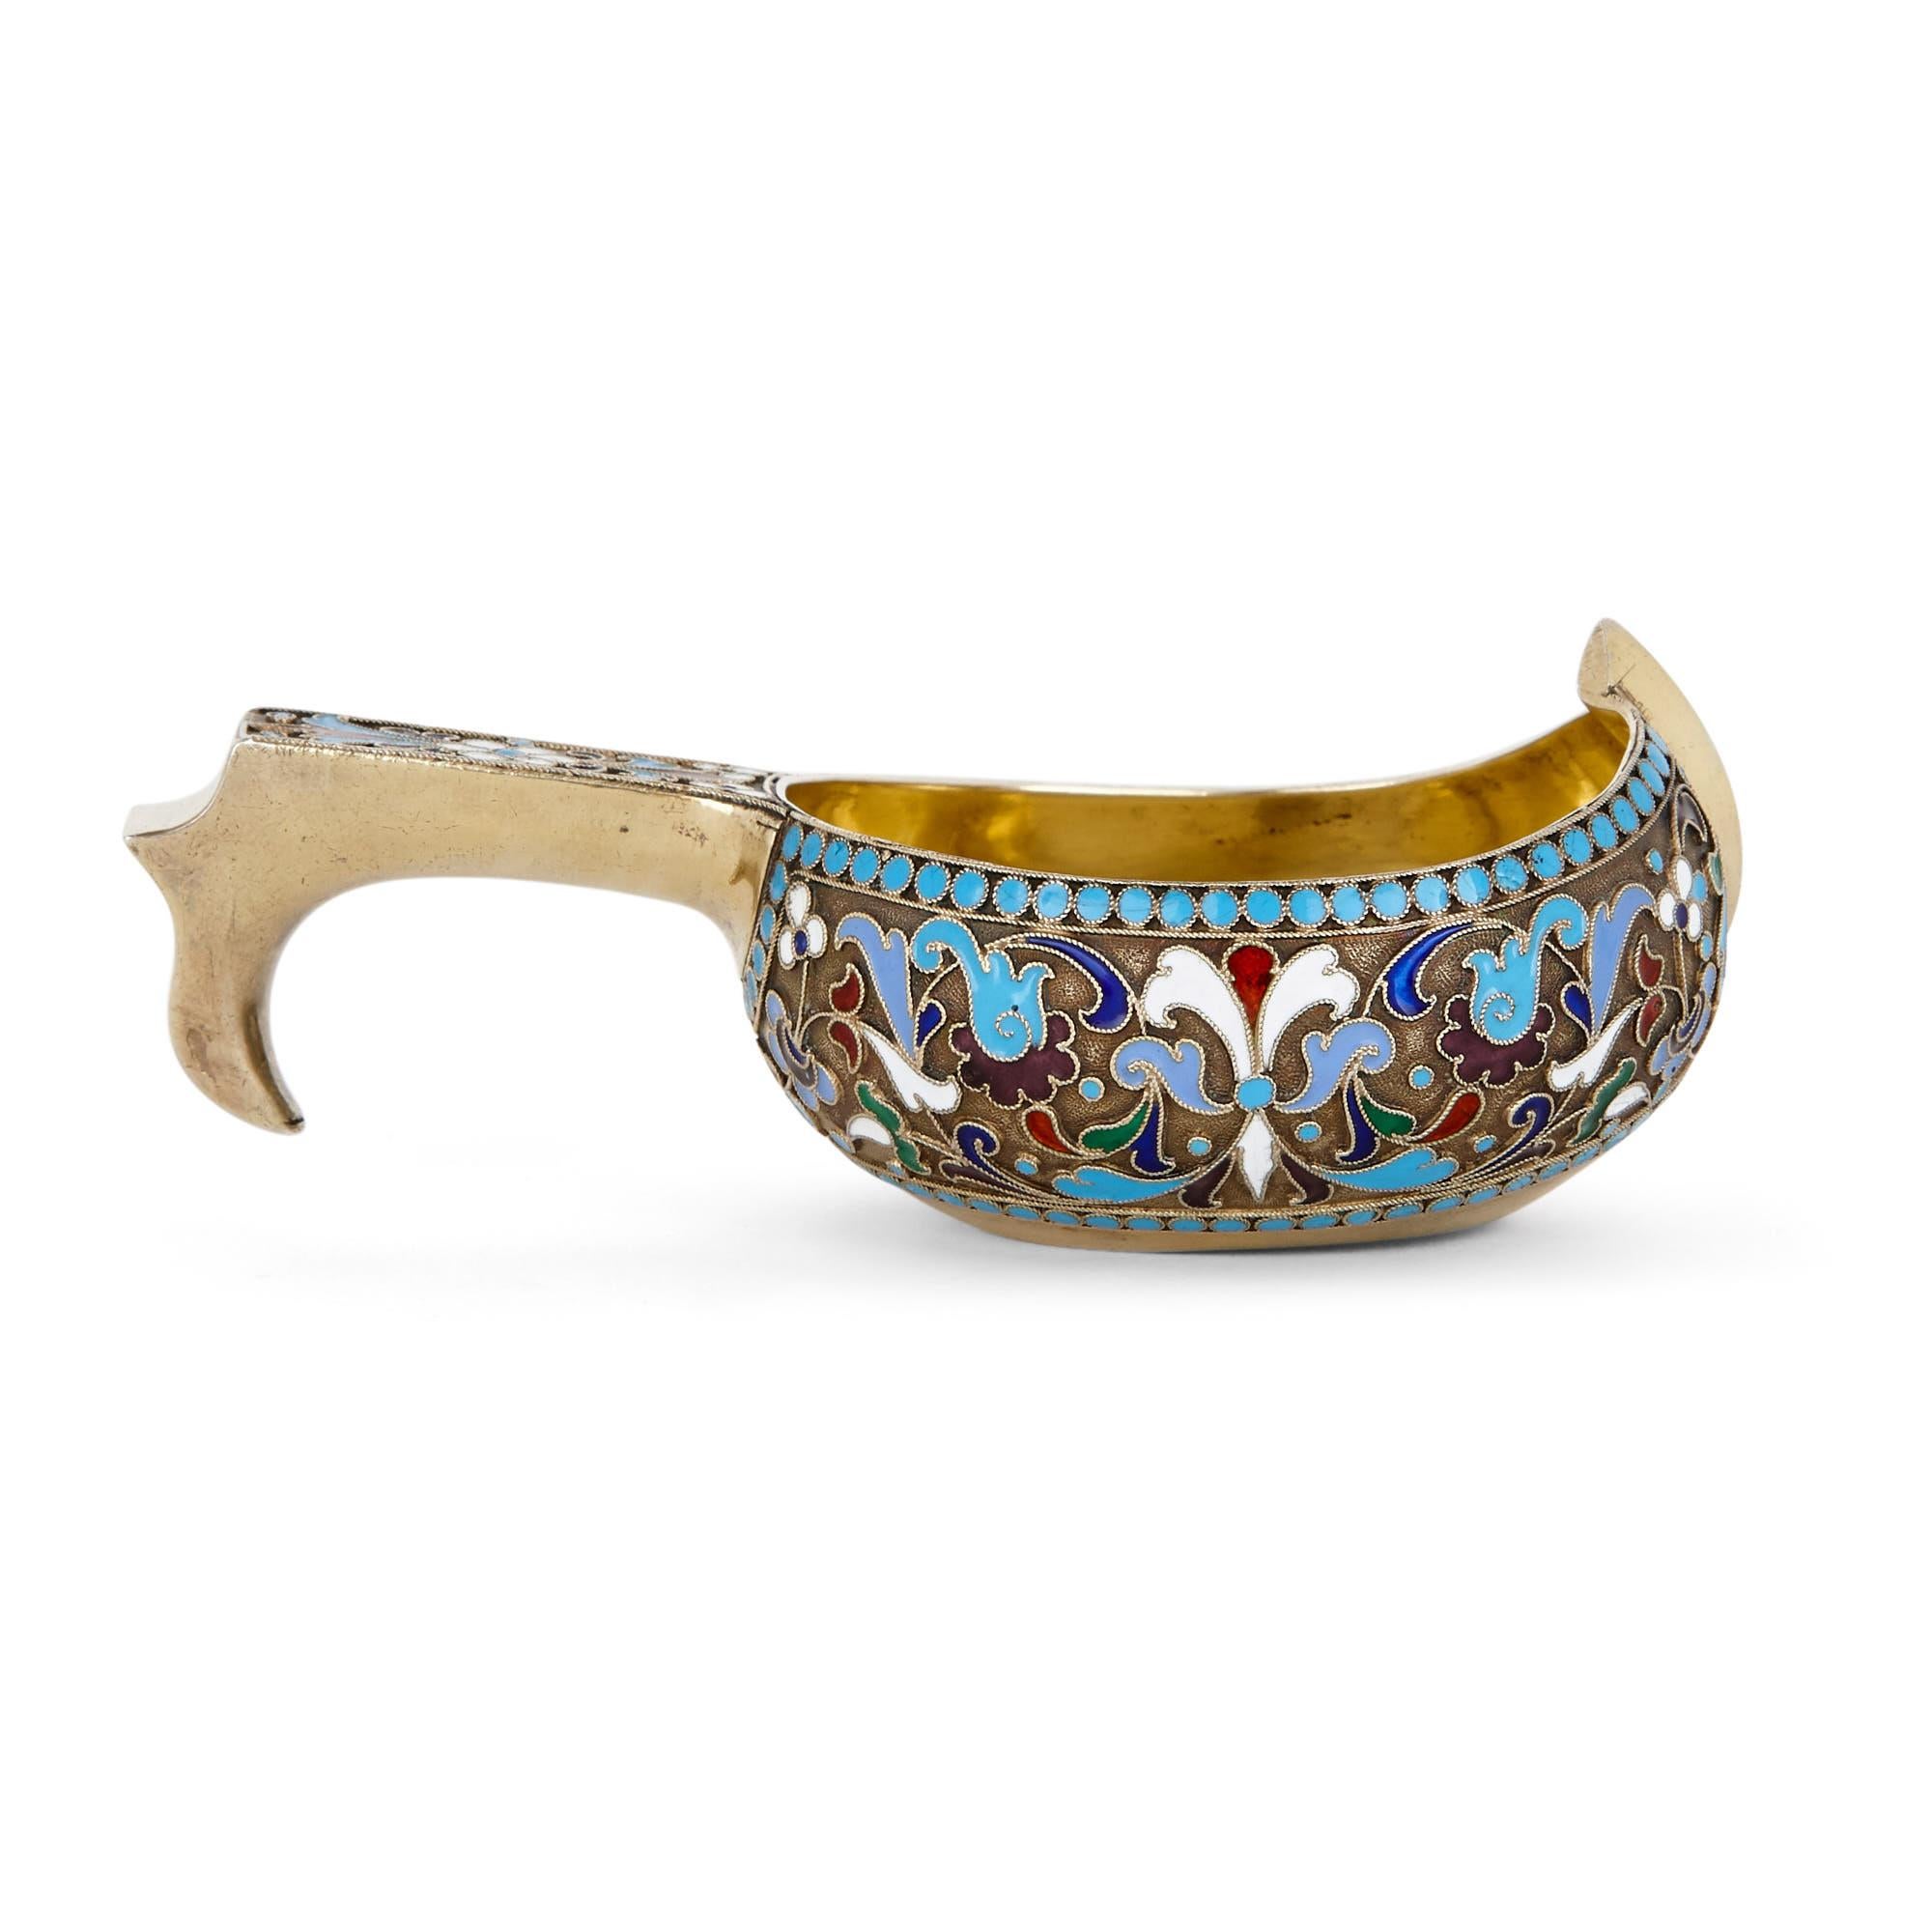 Originally produced as a functional vessel, a Kovsh is now purely ornamental—and was an ornament, a device to demonstrate the skill of the artisan, during the early 20th century when this piece was produced. This Kovsh is traditionally shaped, with